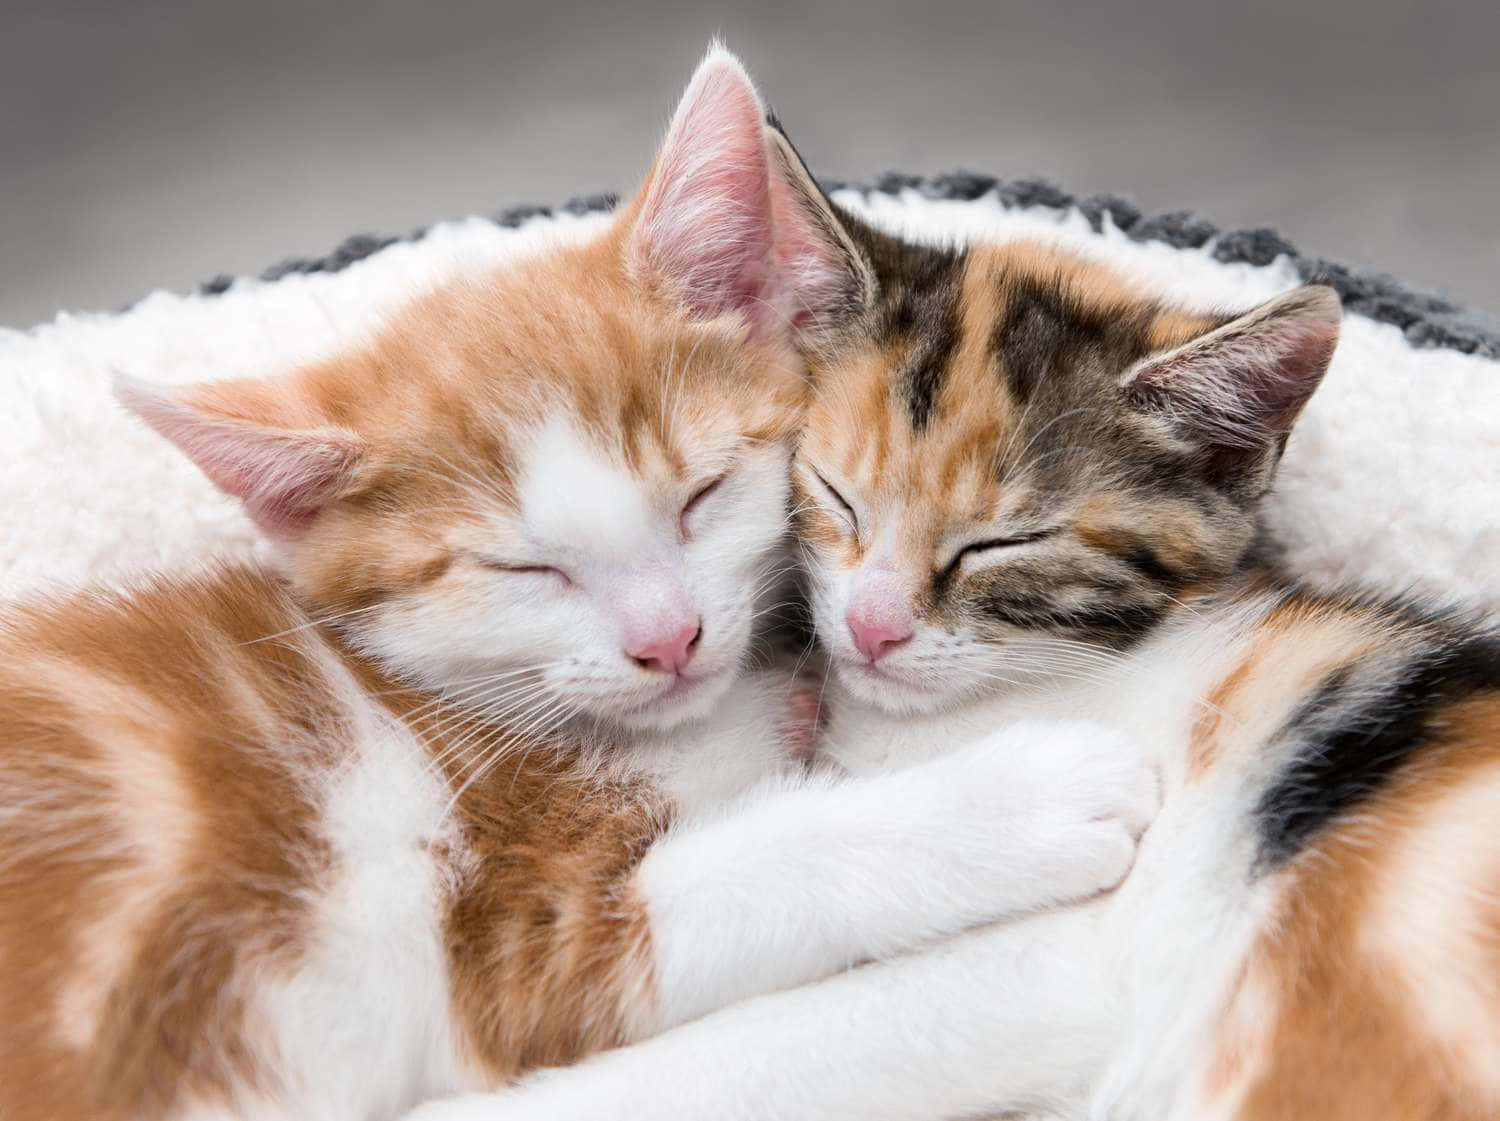 Two Kittens Are Sleeping In A Bed